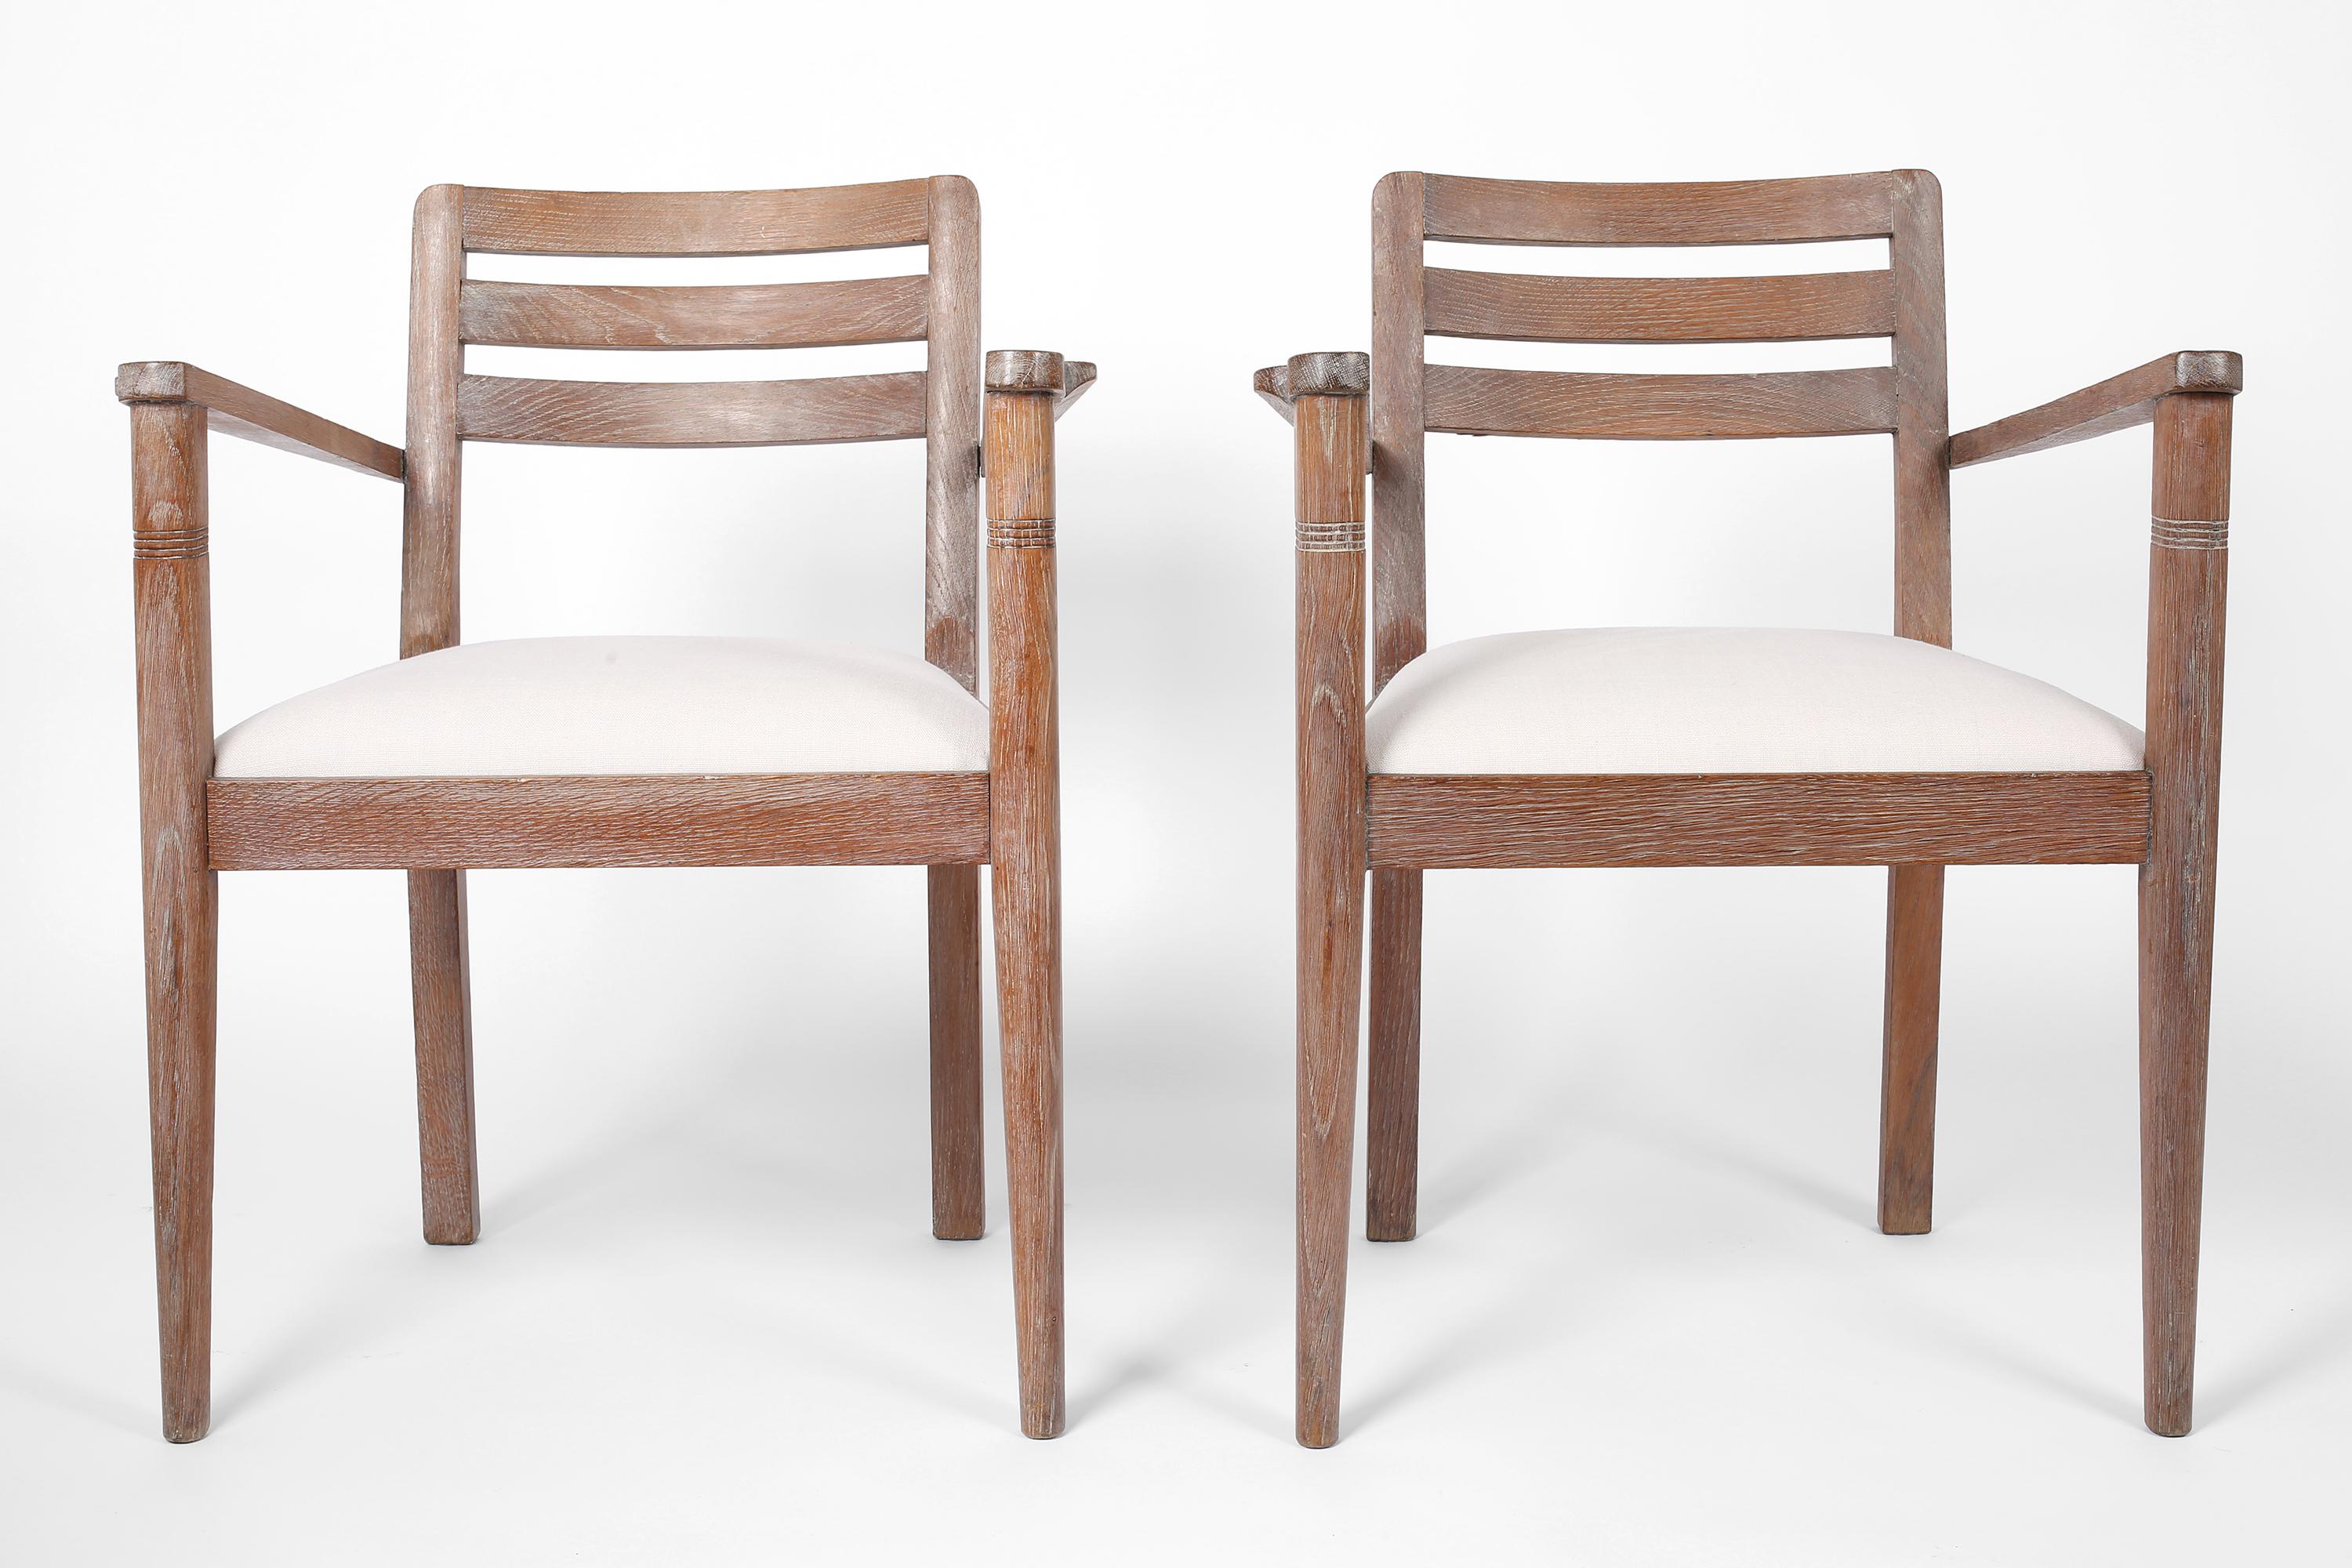 Pair of French Art Deco Limed Oak & Linen Armchairs, C. 1930s For Sale 6